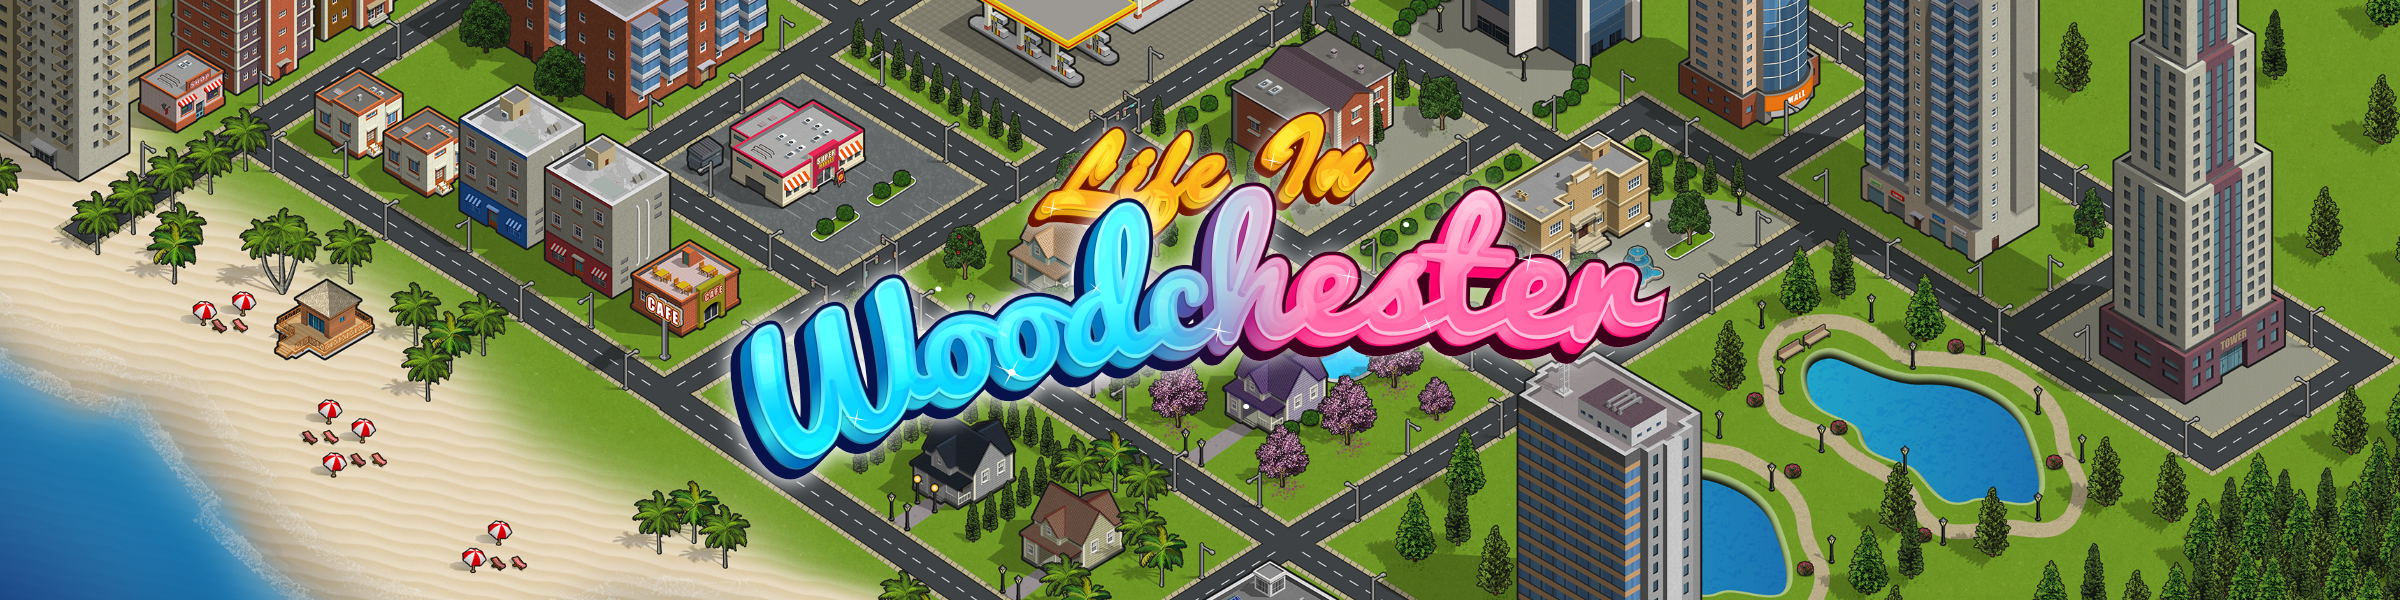 721792_lifeinwoodchesterbanner2.png